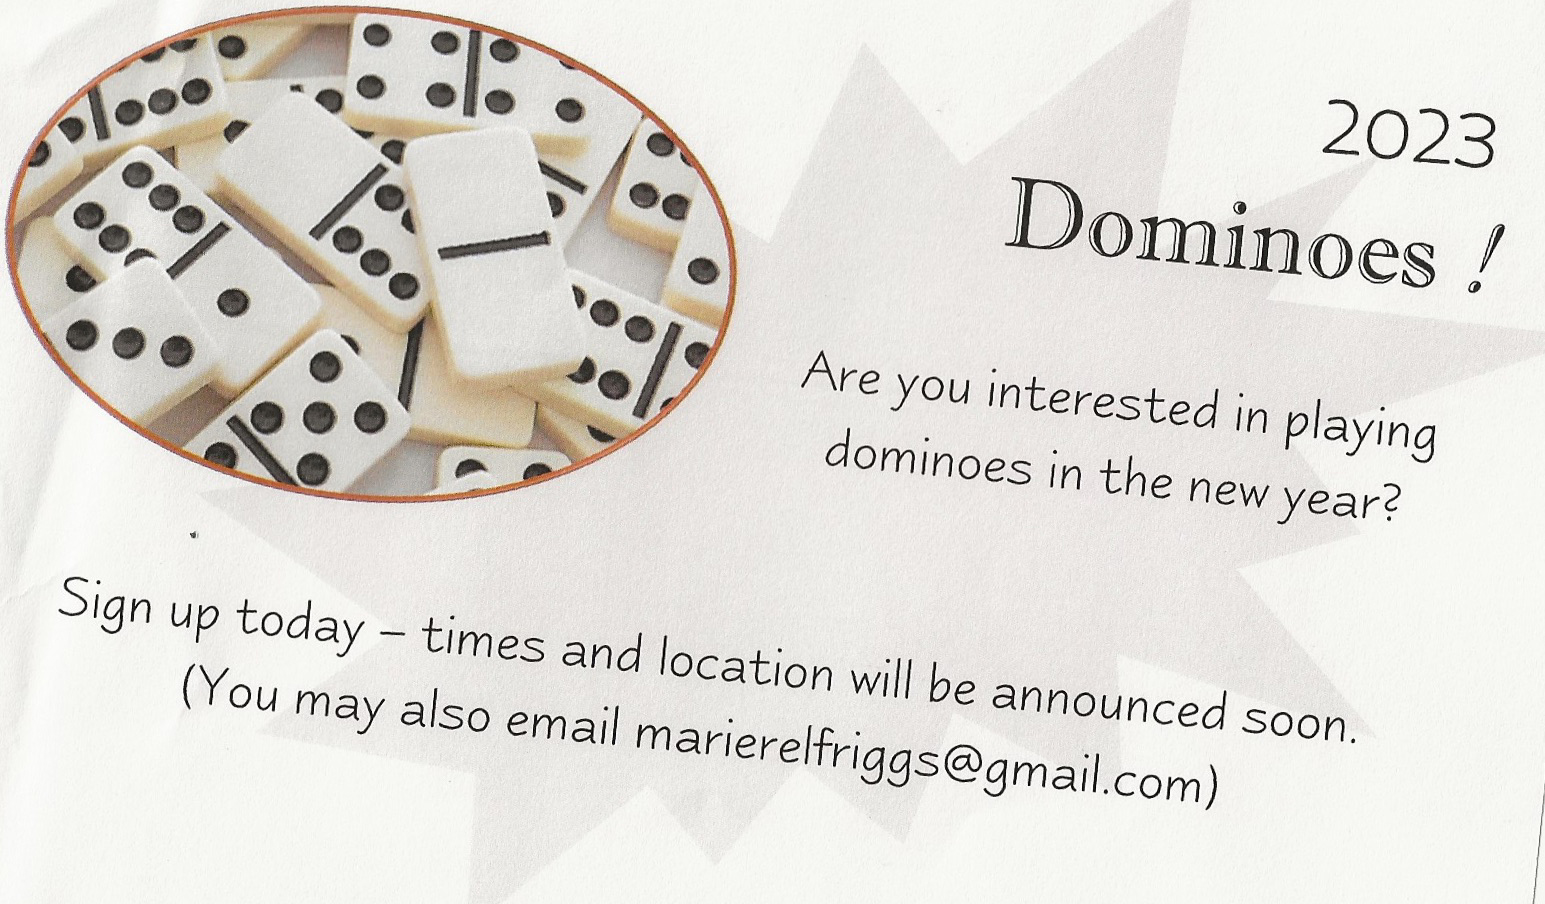 Information for Dominoes for 2023